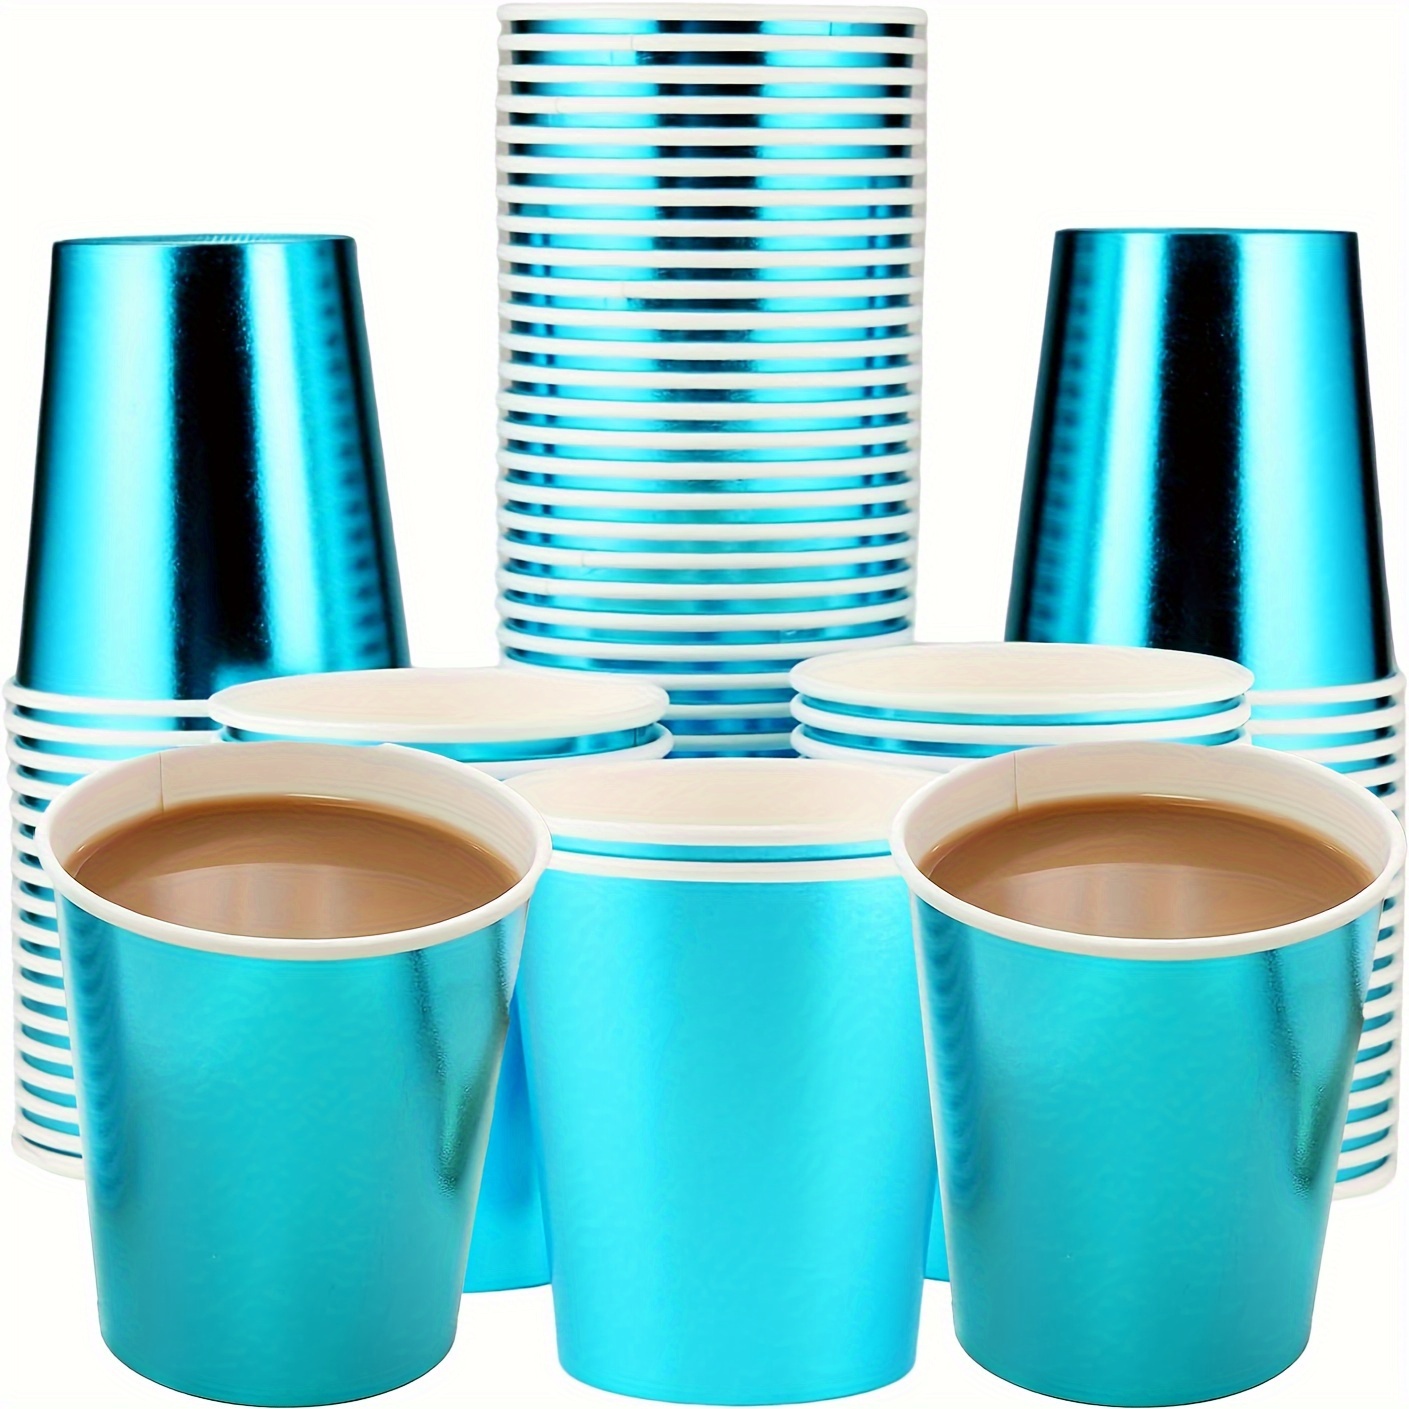 

20/40pcs 9oz Metallic Blue Paper Cups, Disposable Party Cups For Hot And Cold Drinks, Tea Coffee Water Milk Juice Cups, Peacock Blue Decorations For Party Wedding Picnic Bar